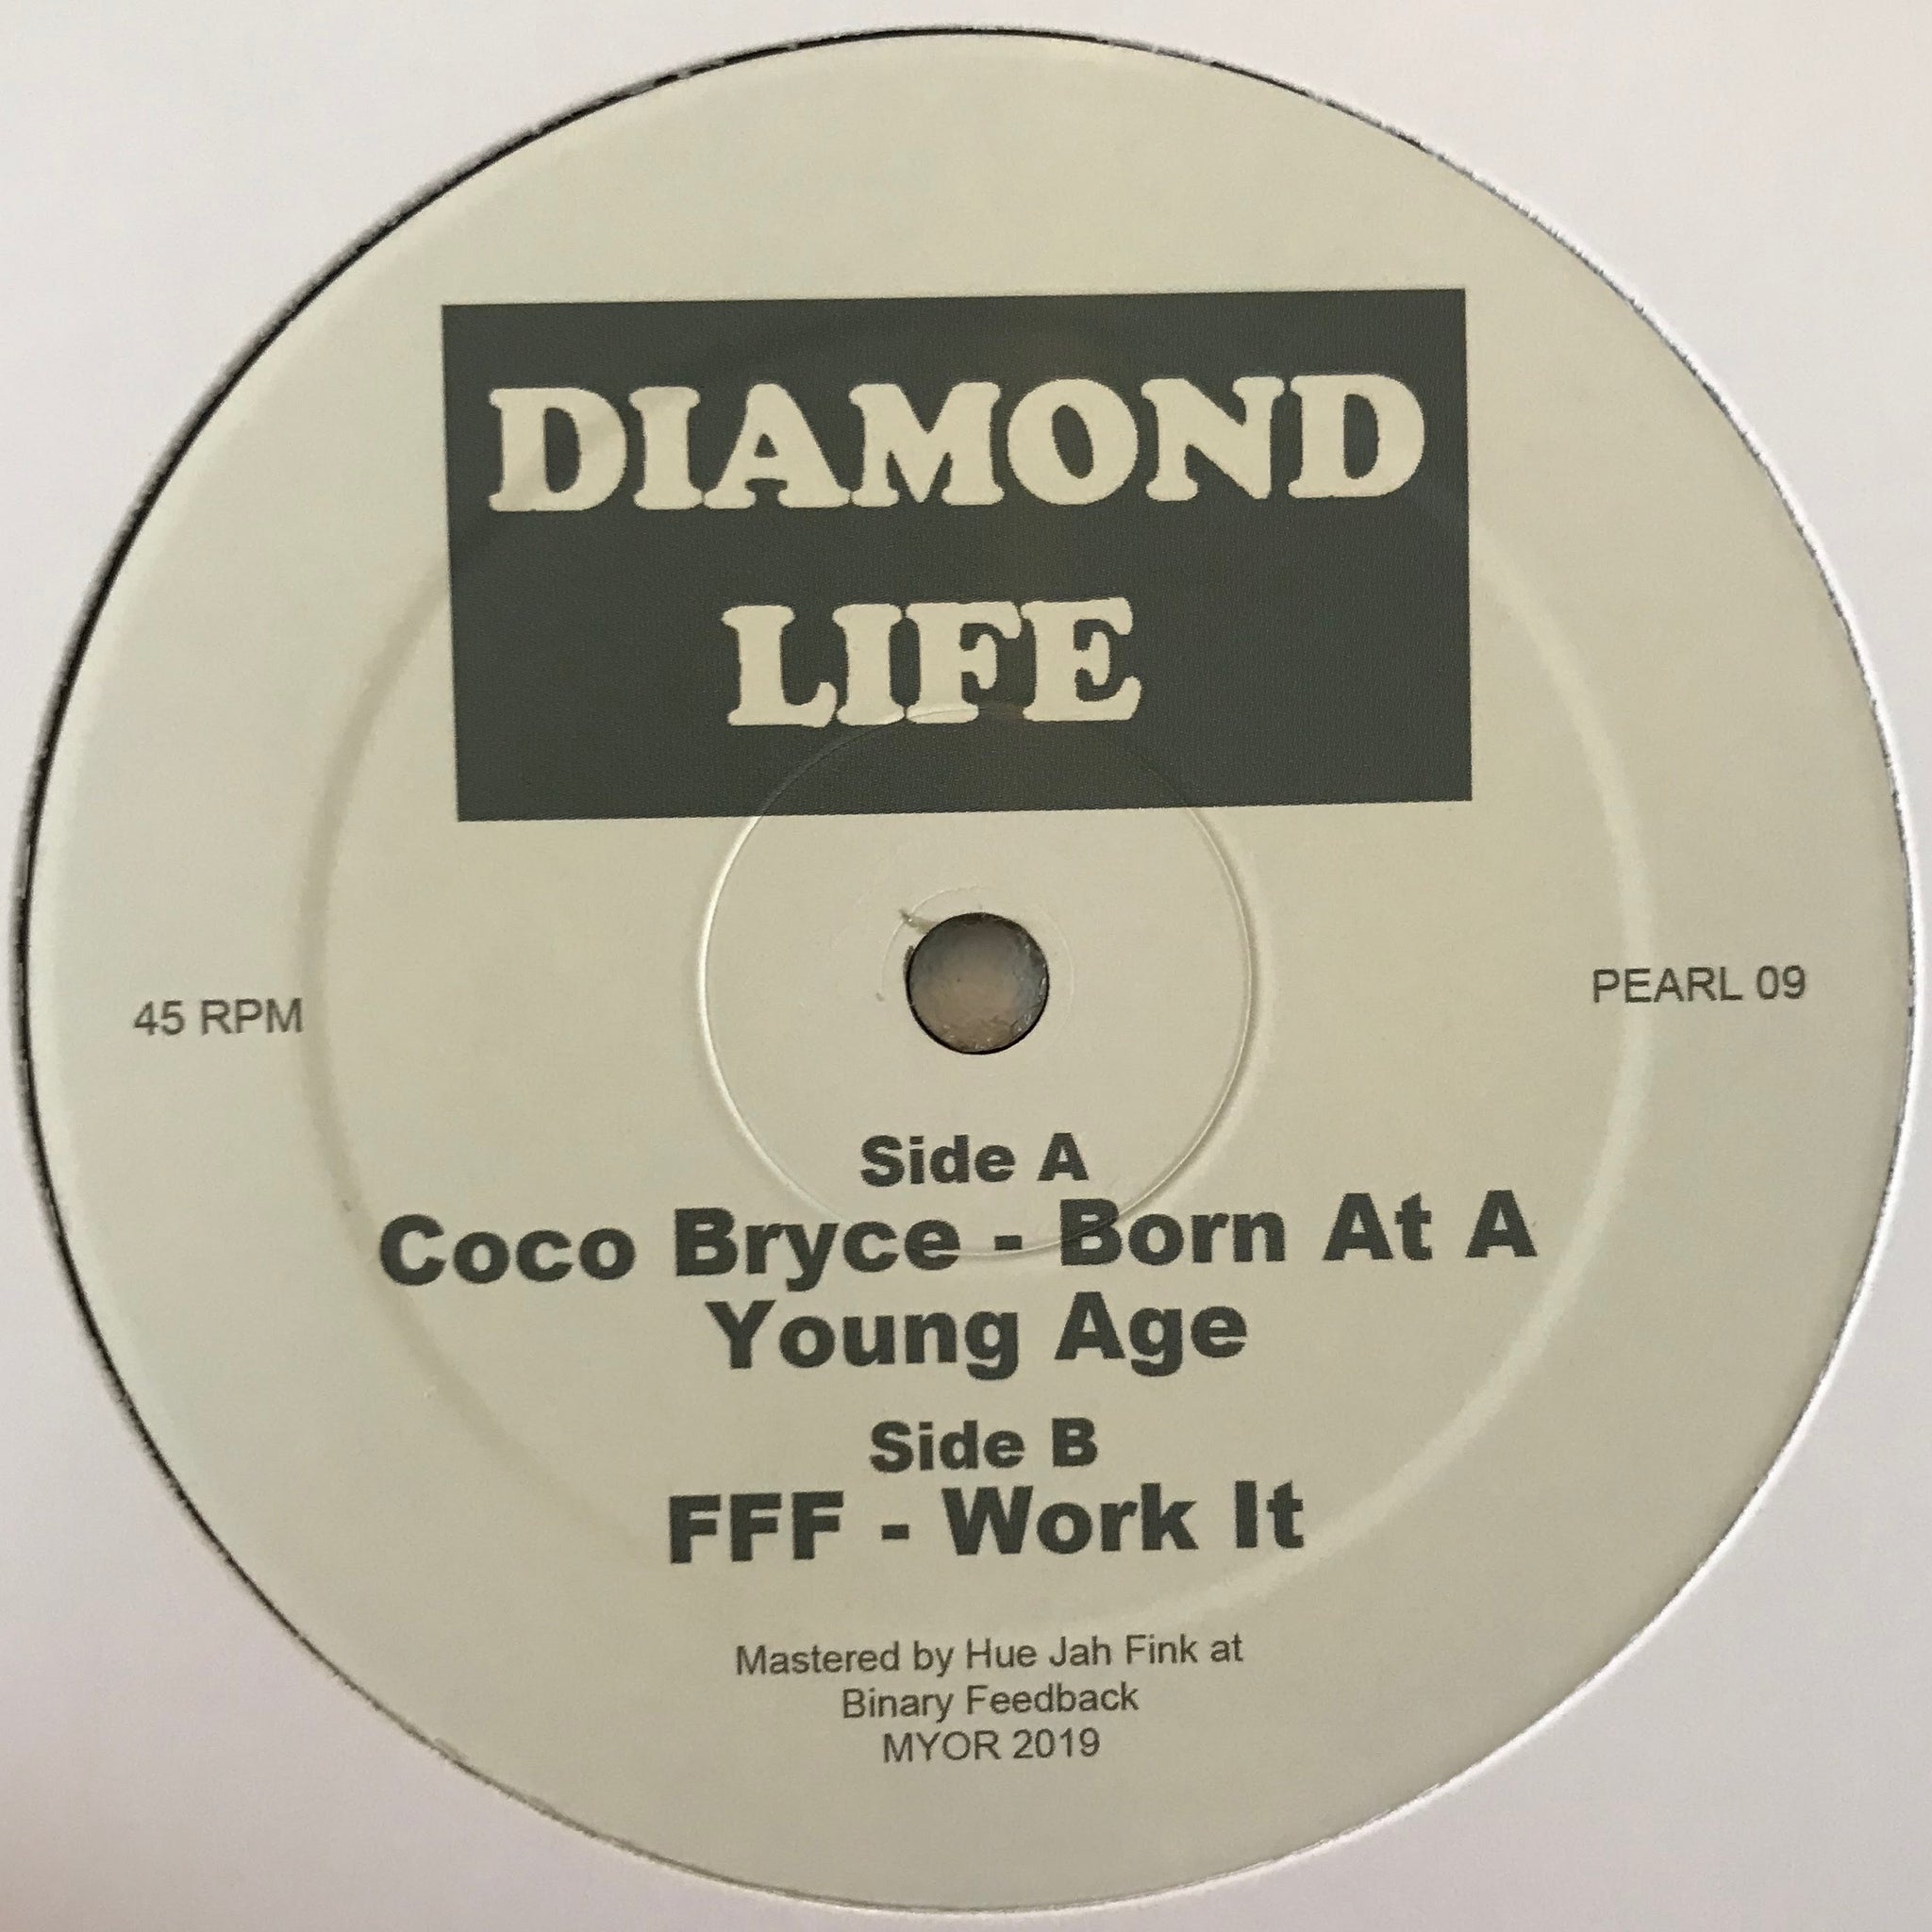 Coco Bryce & FFF - PEARL09 (Pre-order) - Out Of Joint Records